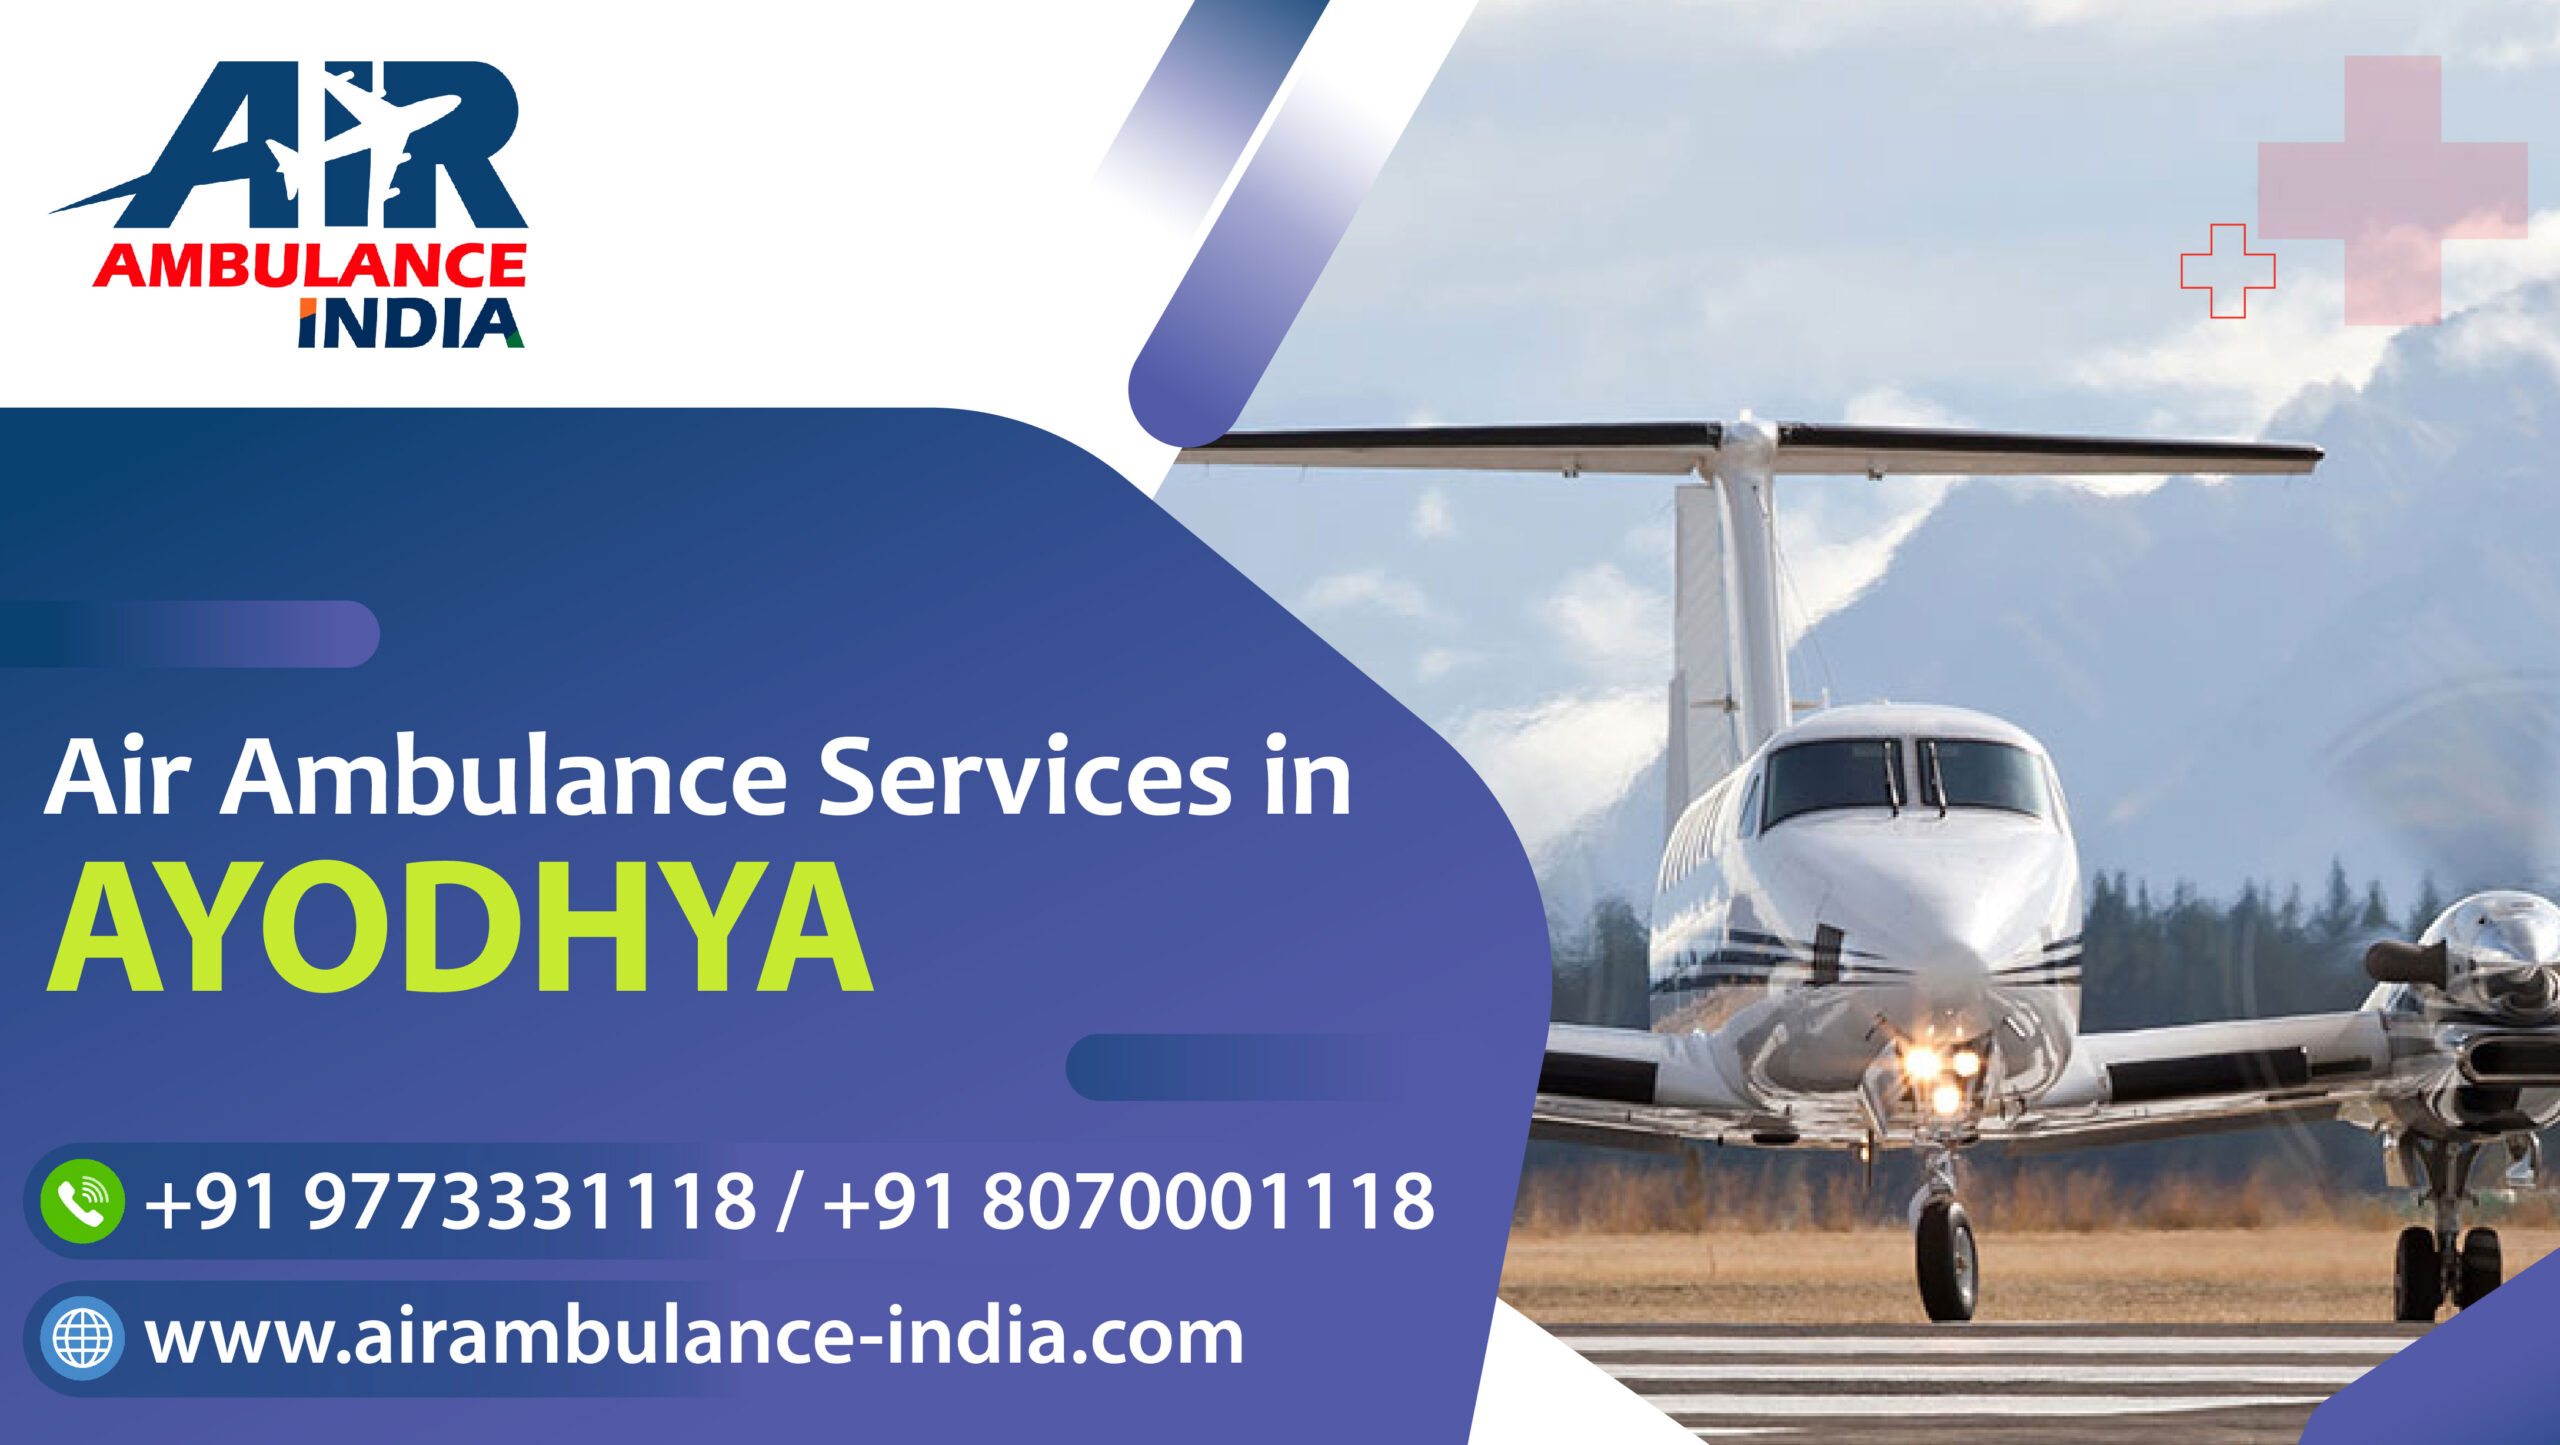 air ambulance services in ayodhya